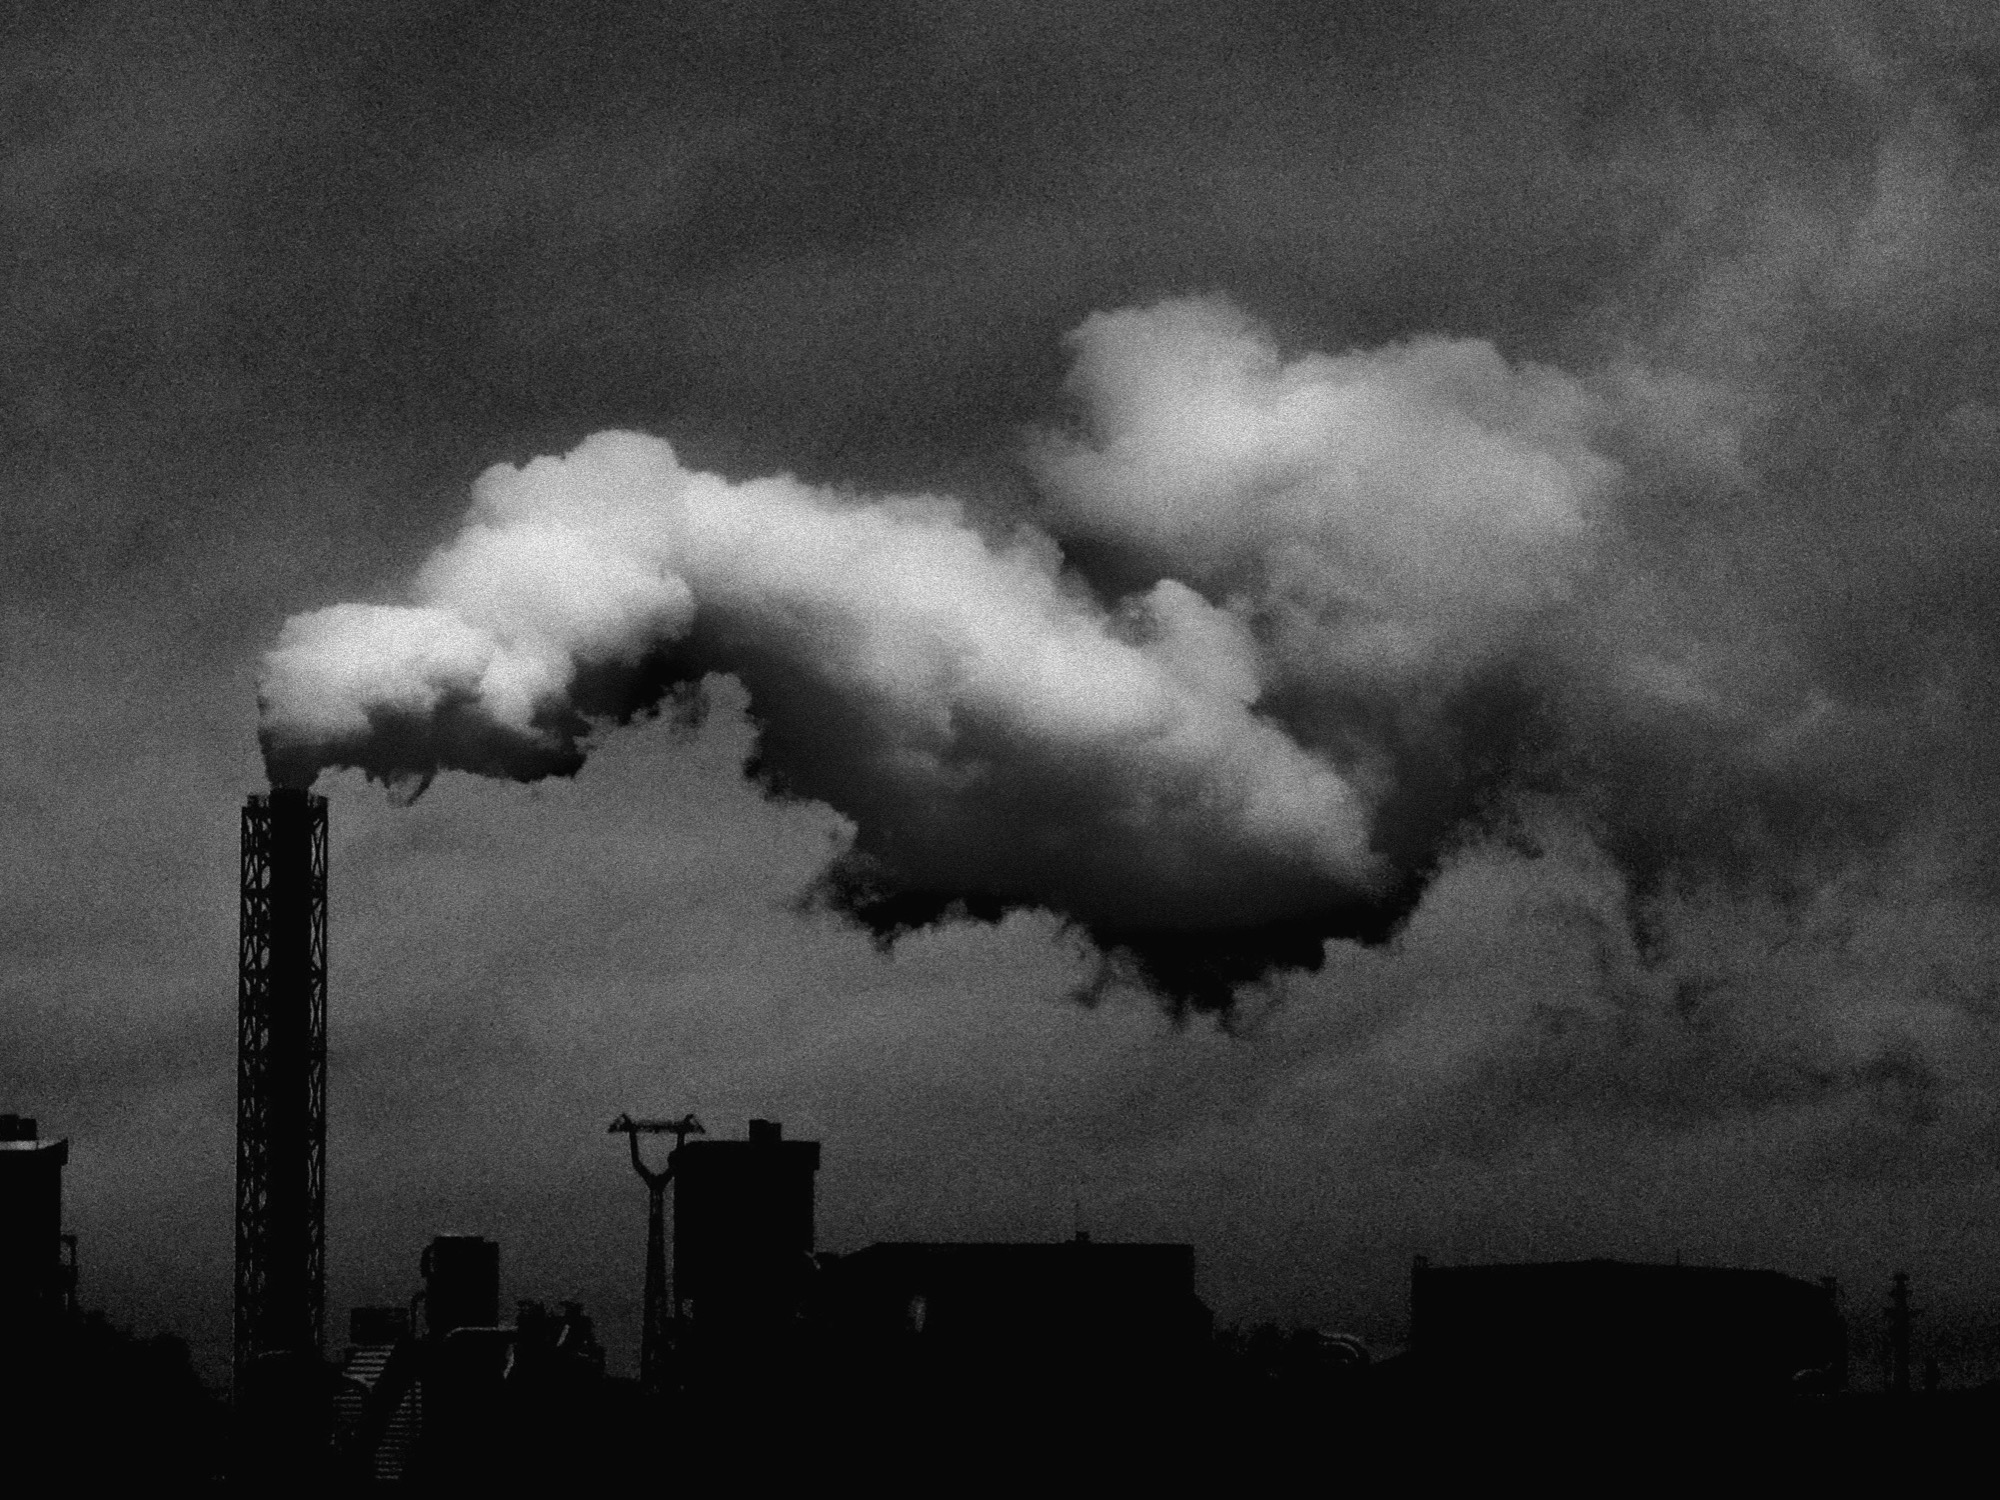 Cracking down on soot pollution could save thousands of lives—but the EPA won’t do it